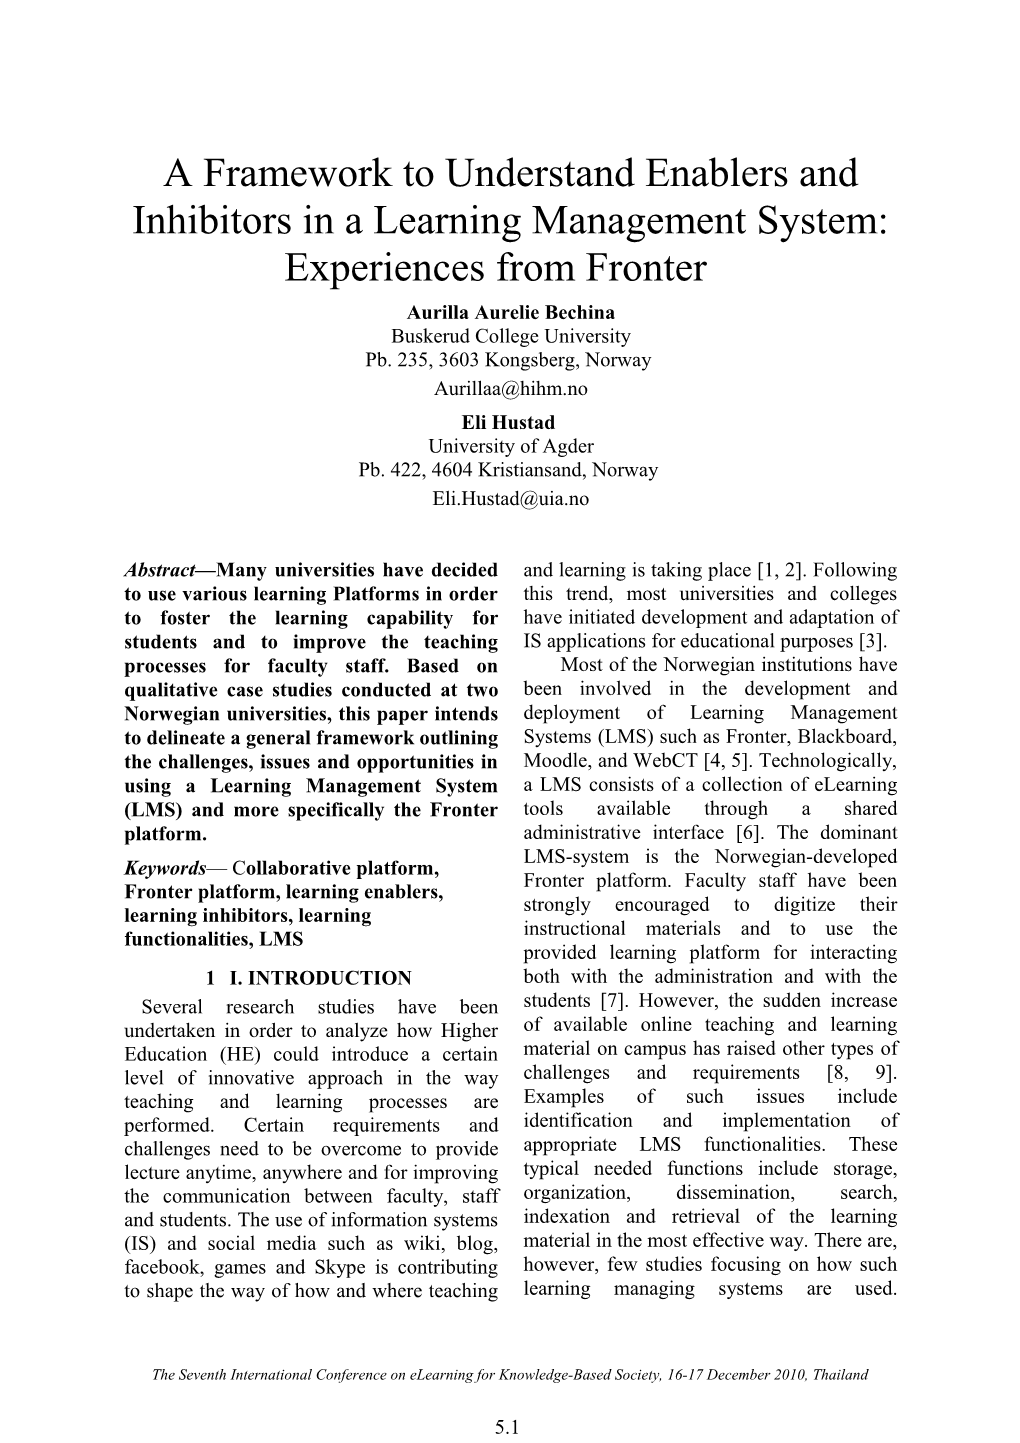 A Framework to Understand Enablers and Inhibitors in a Learning Management System: Experiences